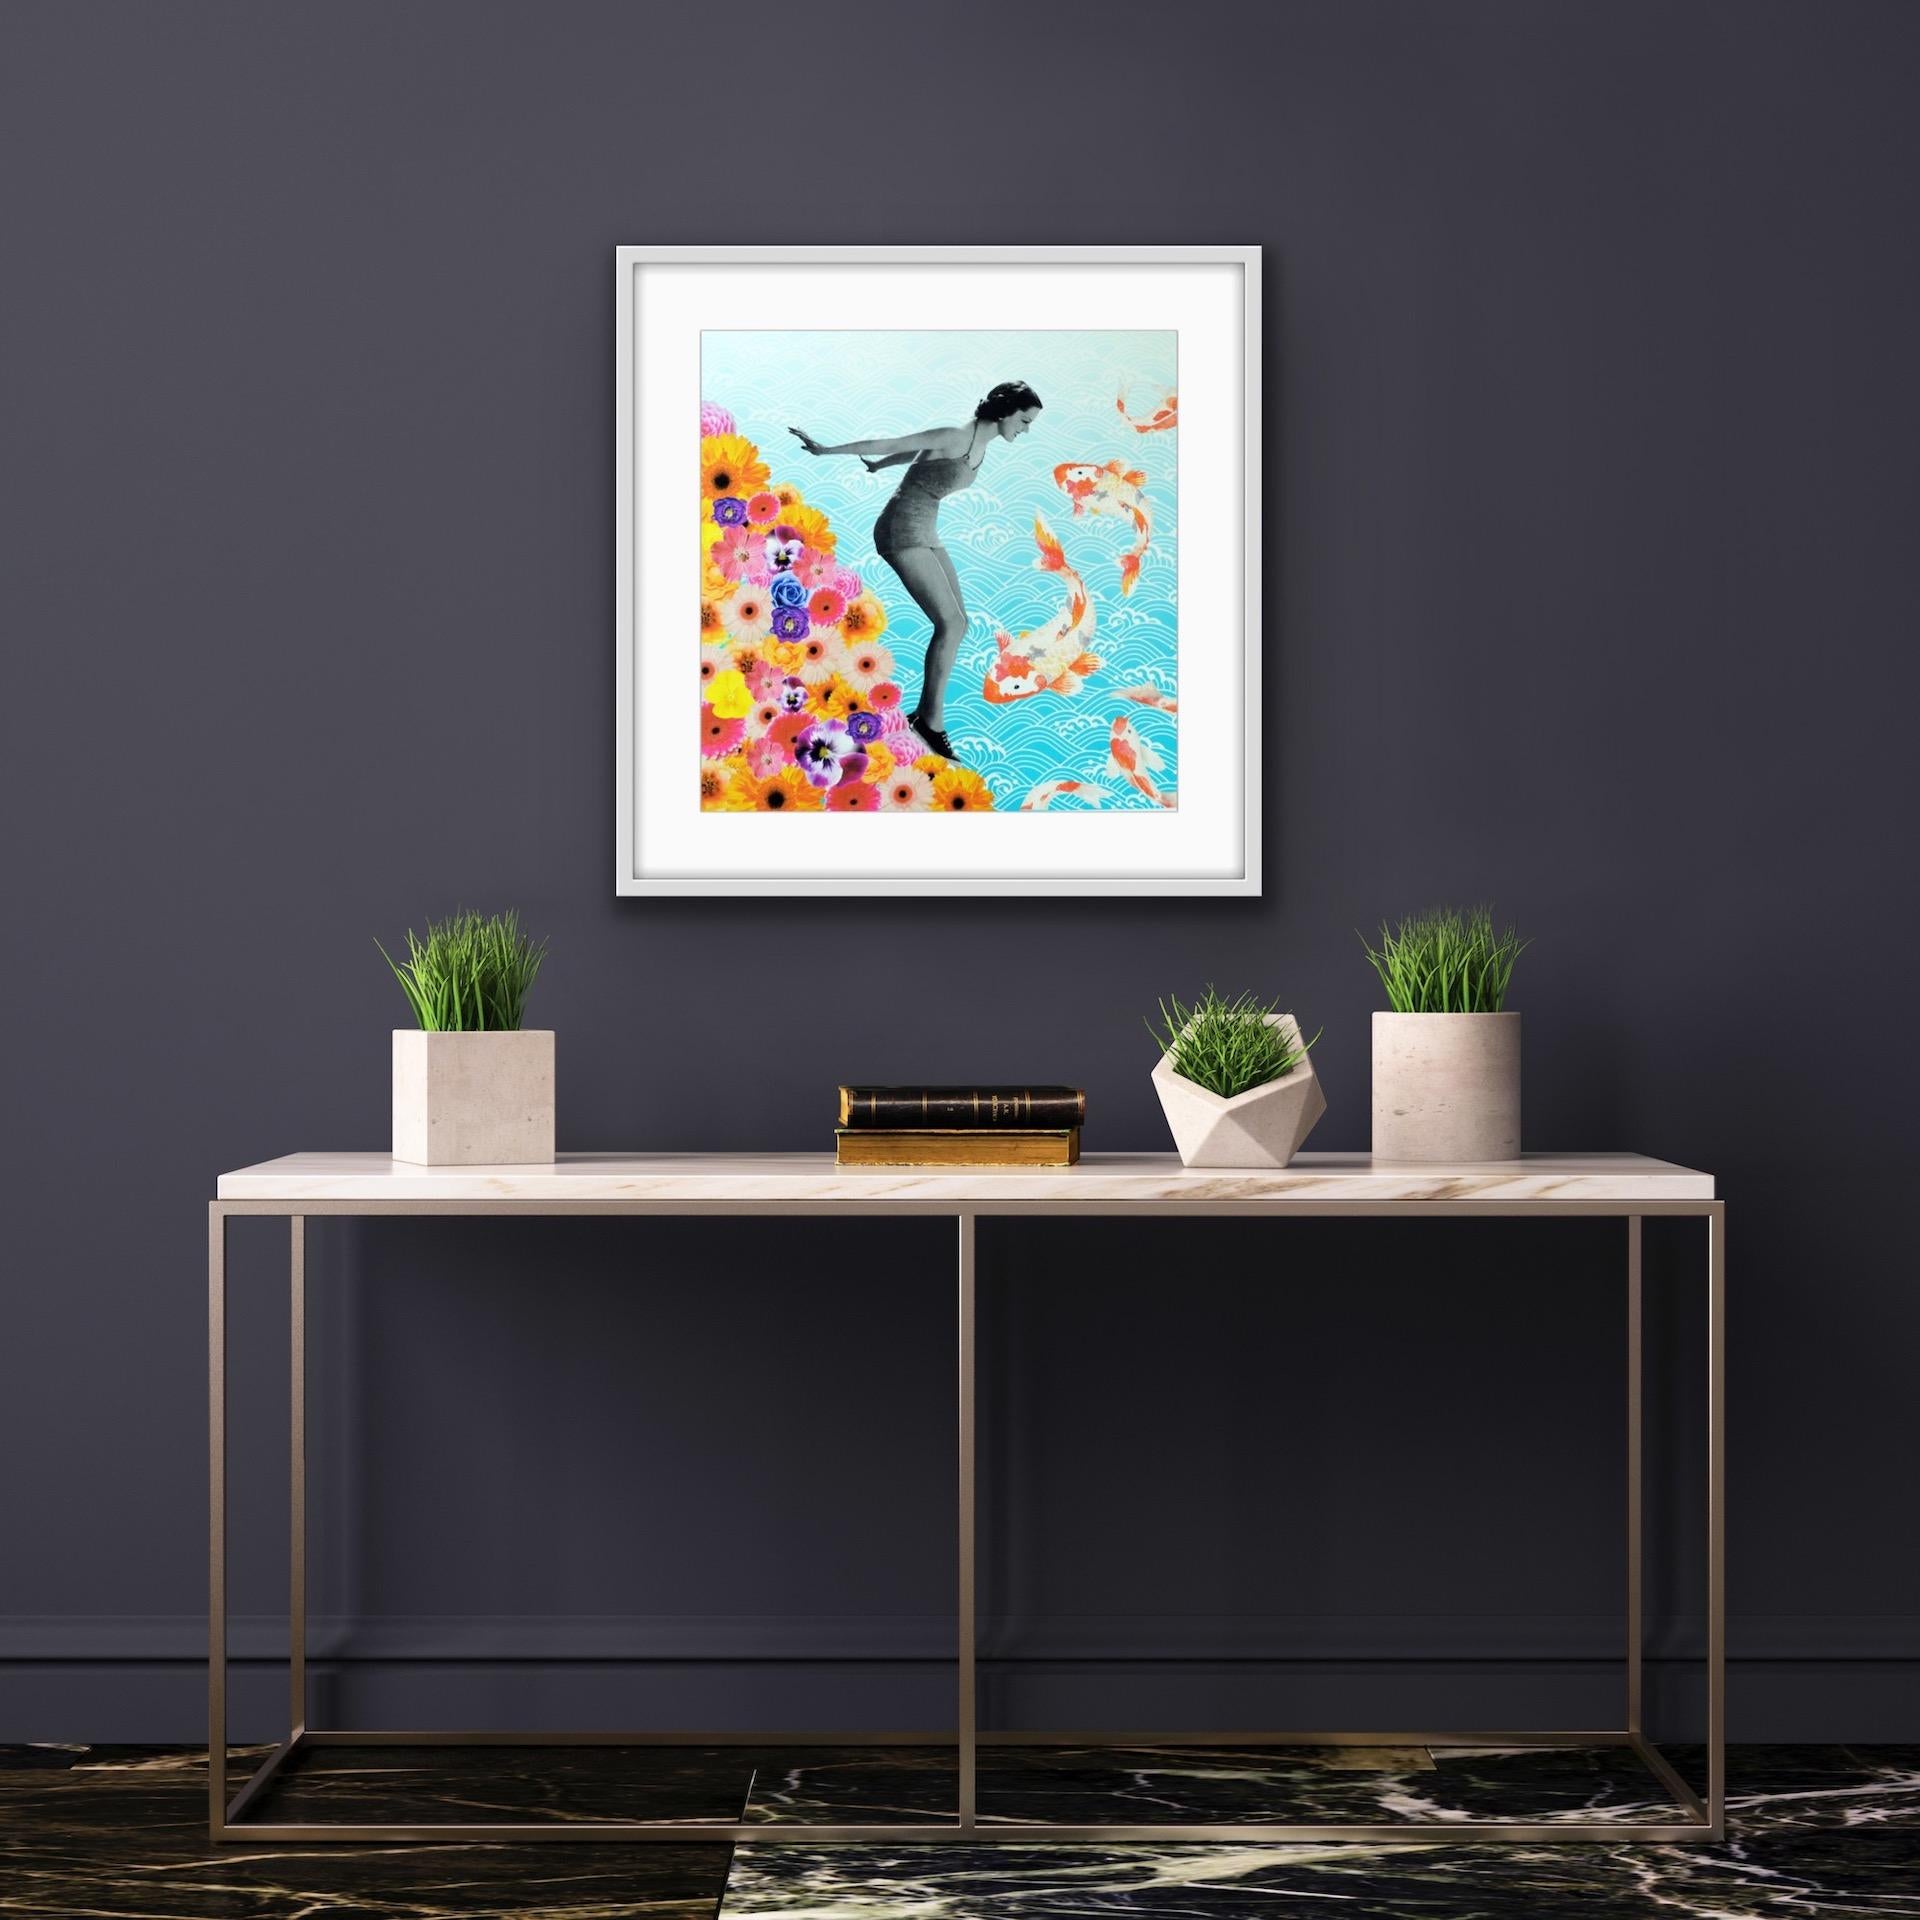 Anne Storno
Water Baby
A limited edition of 30.
Image Size: H:50 cm x W:50 cm
Paper Size: H60cm x W60cm
Sold Unframed
Please note that in situ images are purely an indication of how a piece may look.


A bright and colourful hand made screen print,